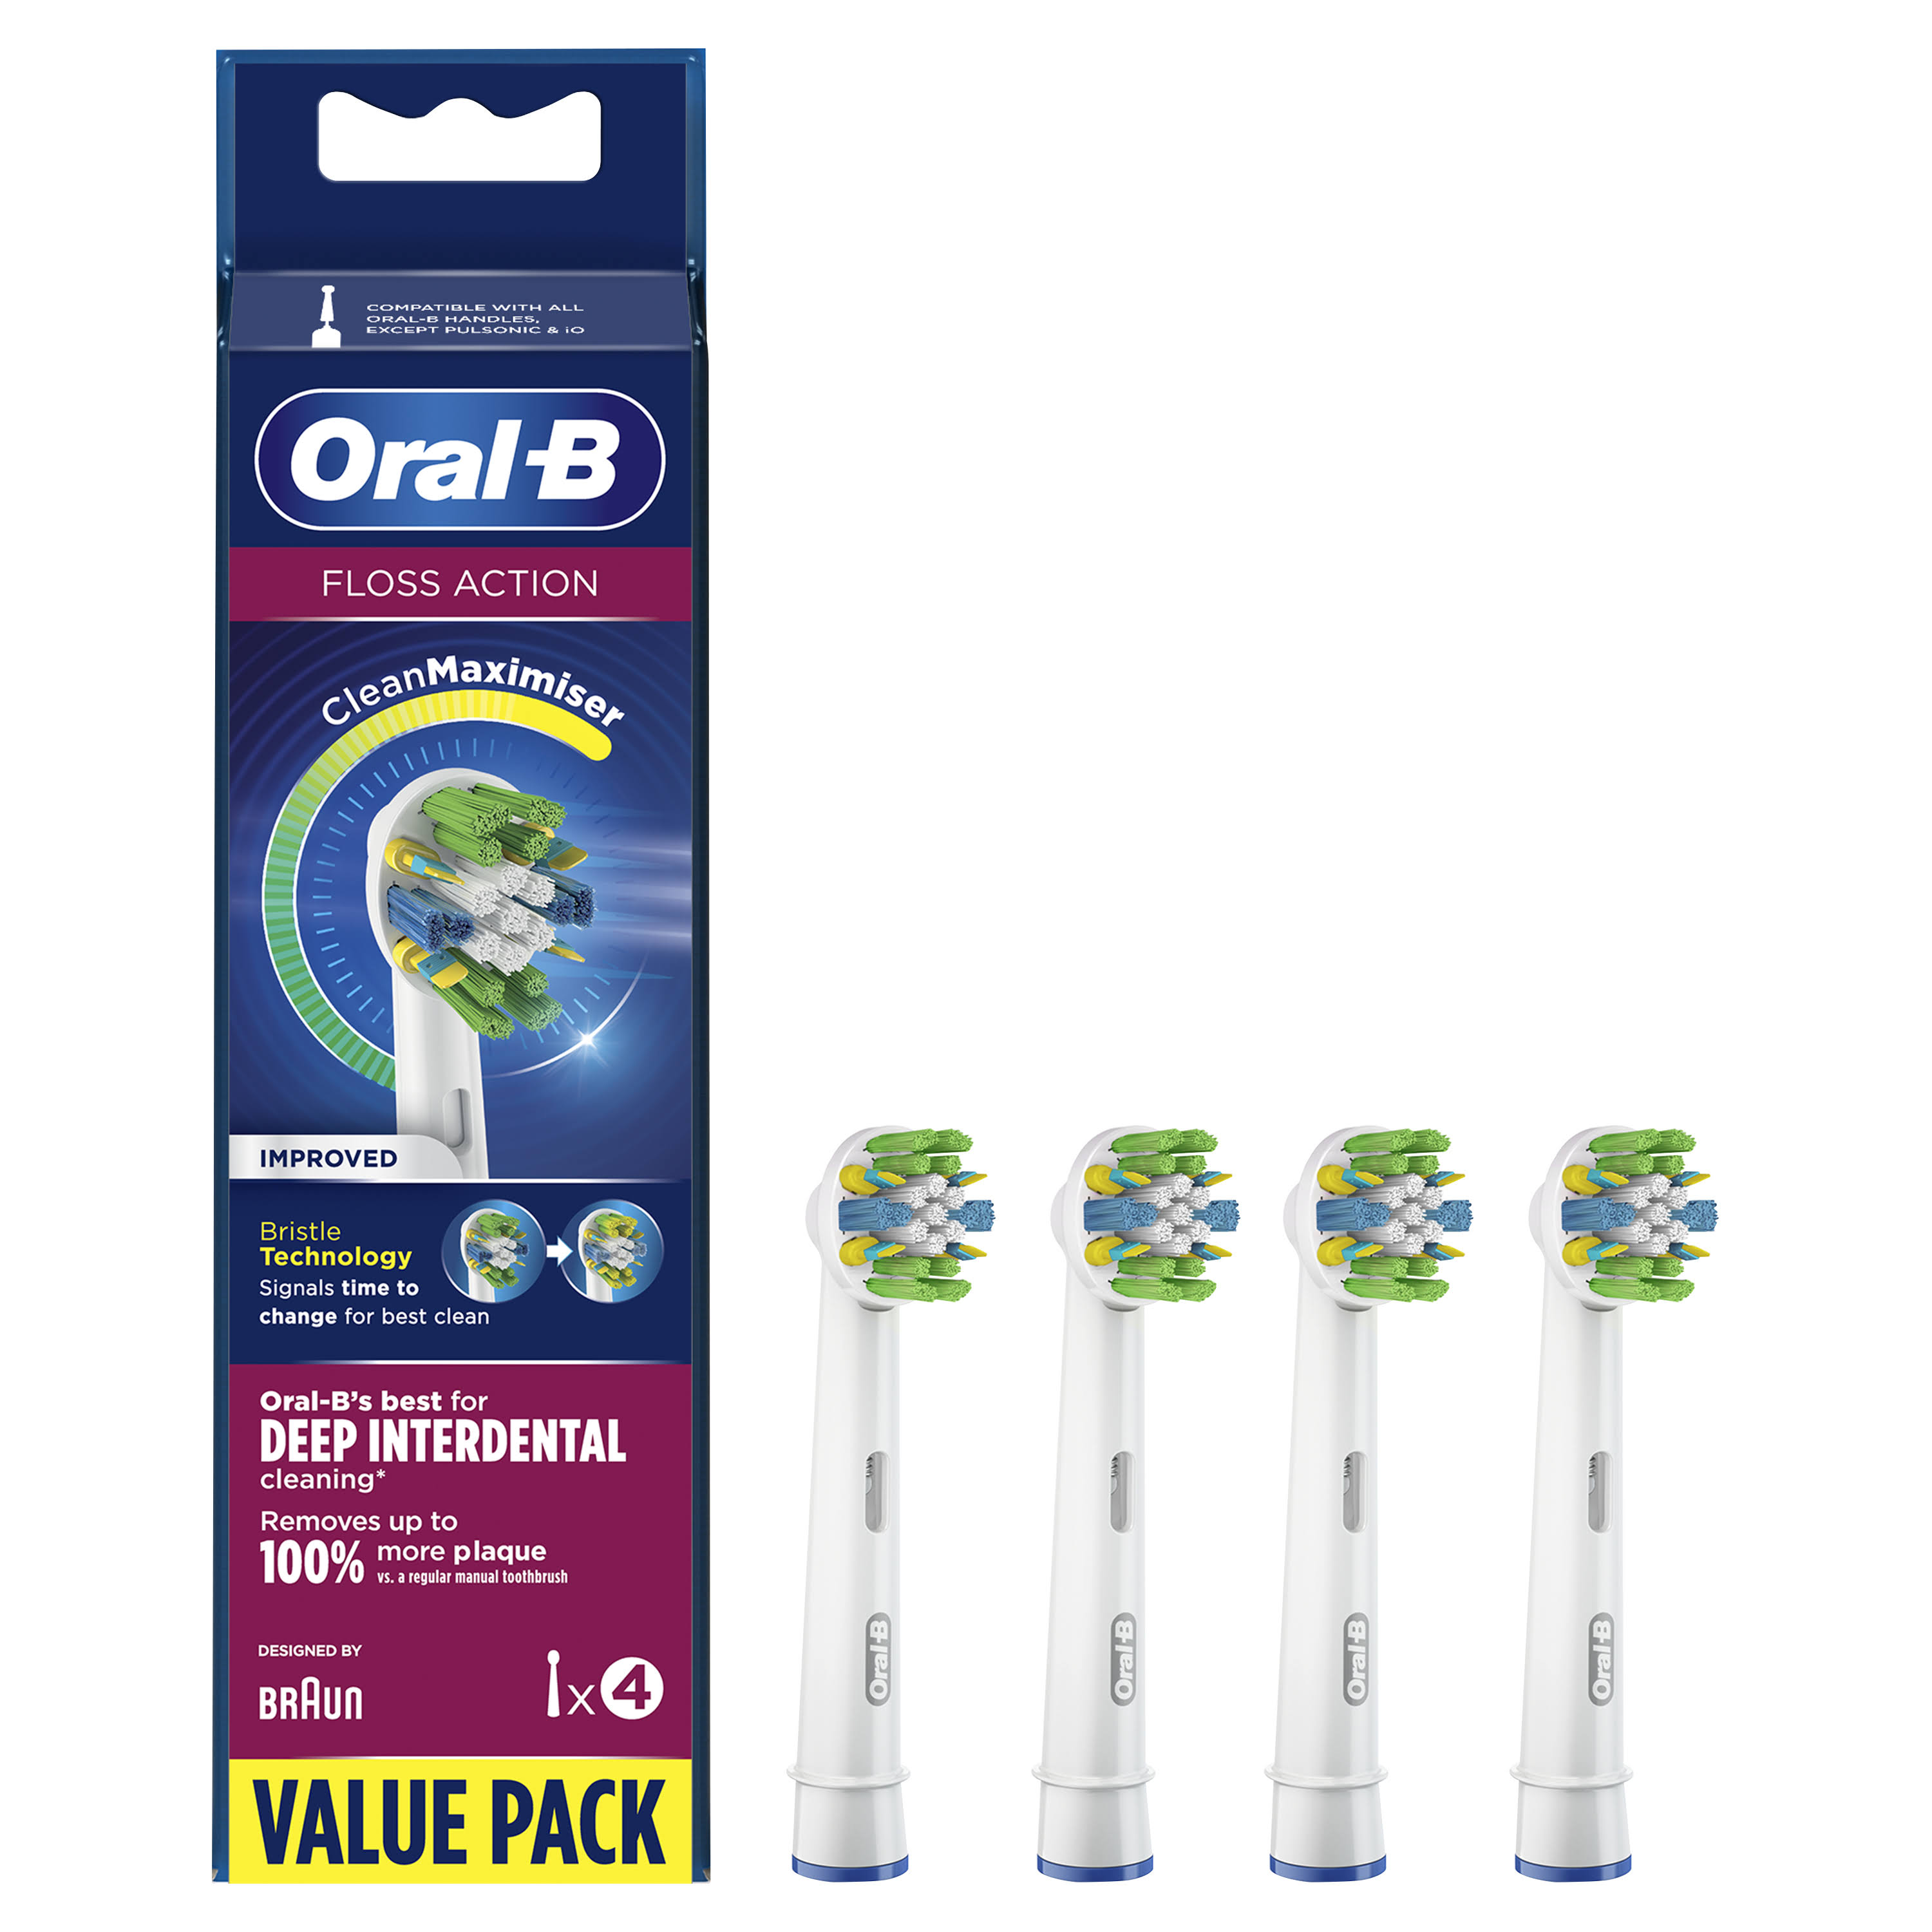 Oral-B FlossAction Replacement Toothbrush Head with CleanMaximiser - Pack of 4